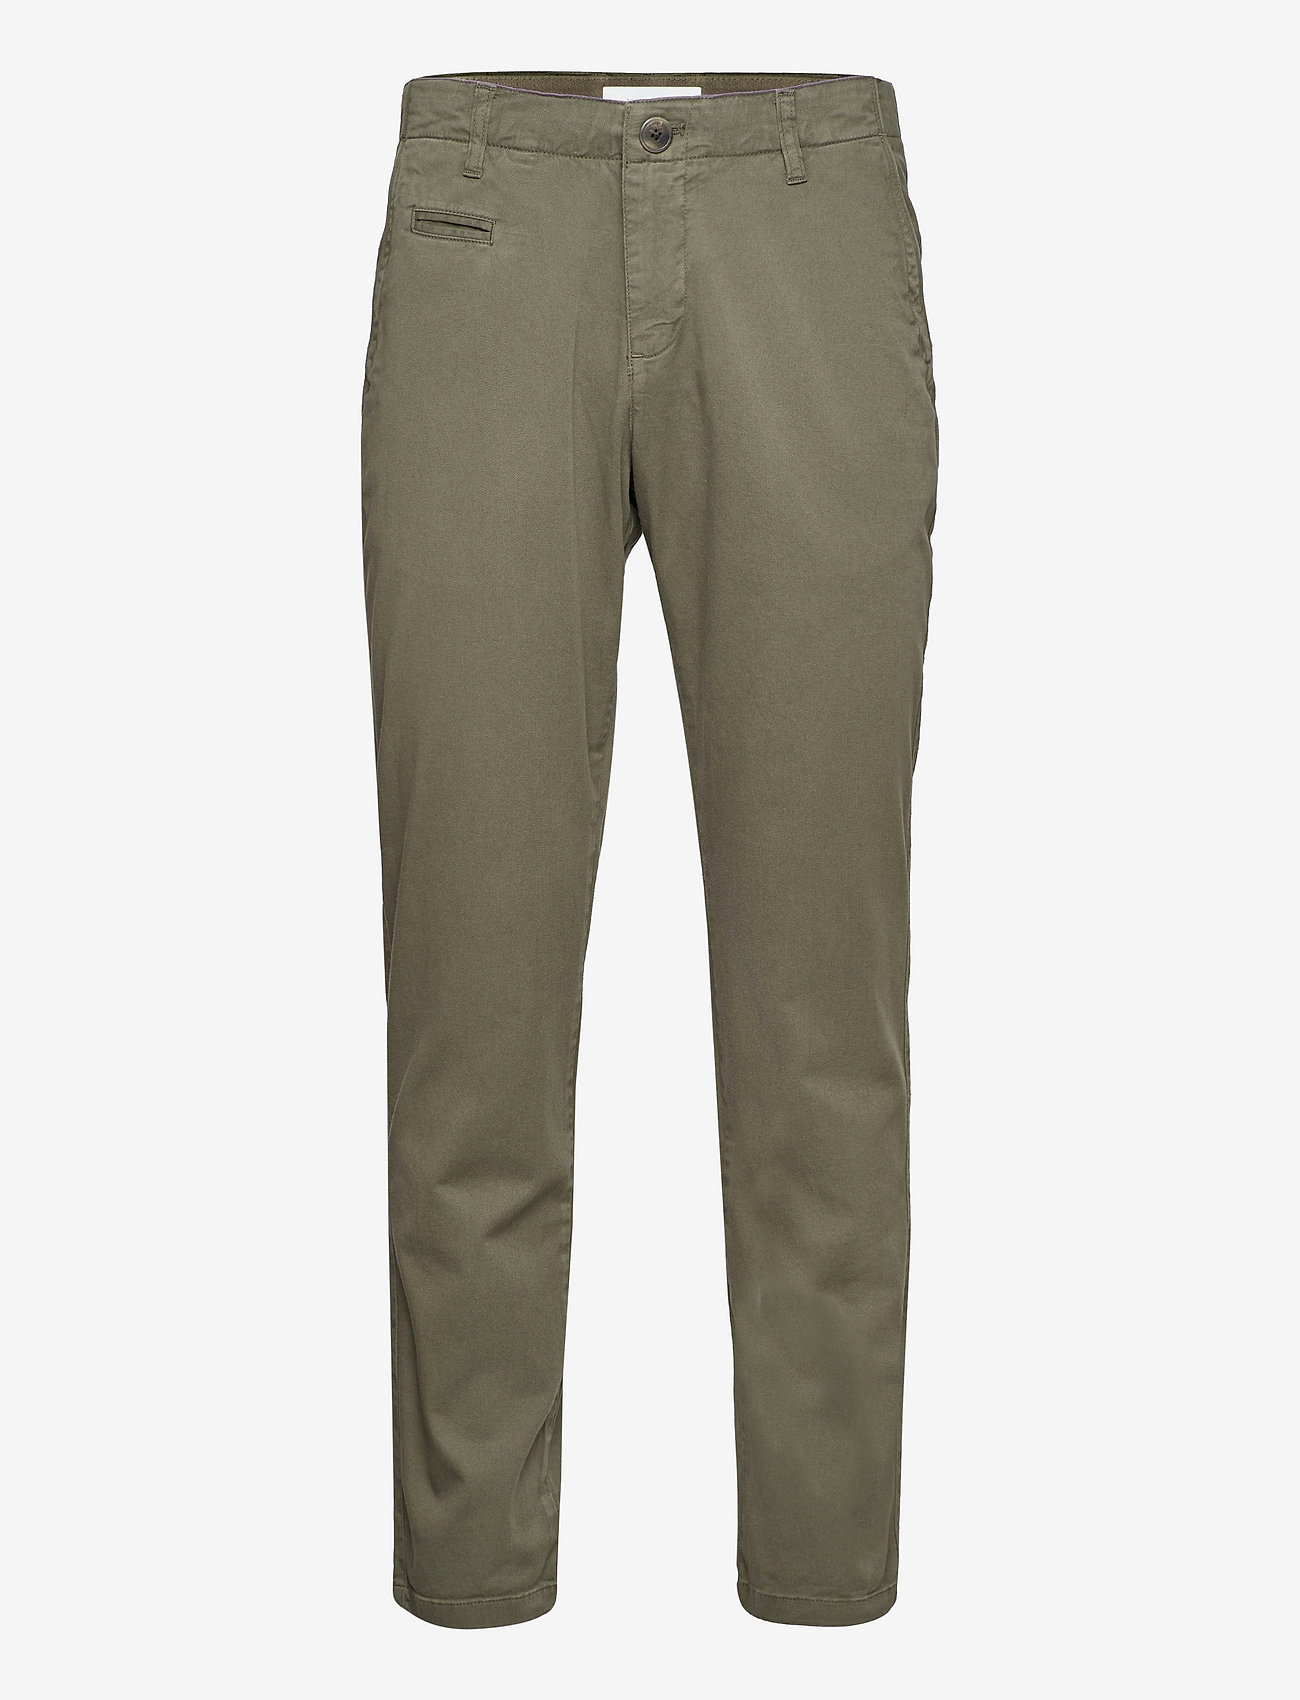 Knowledge Cotton Apparel - CHUCK regular stretched chino pant - chinos - forrest night - 0